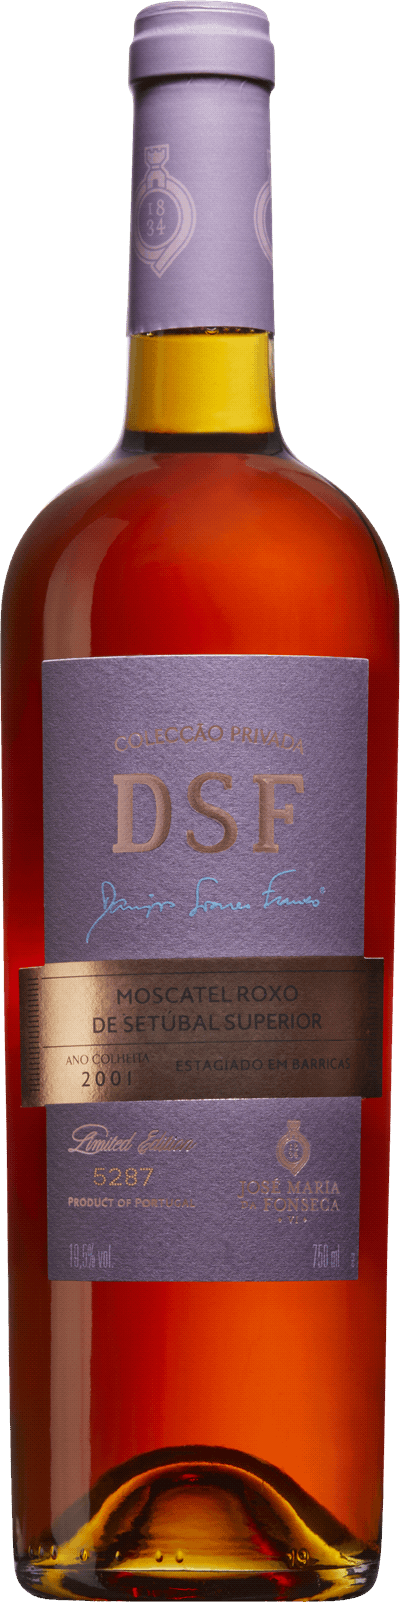 de Moscatel | Systembolaget Setùbal Roxo DSF Collection 2001 Superior,